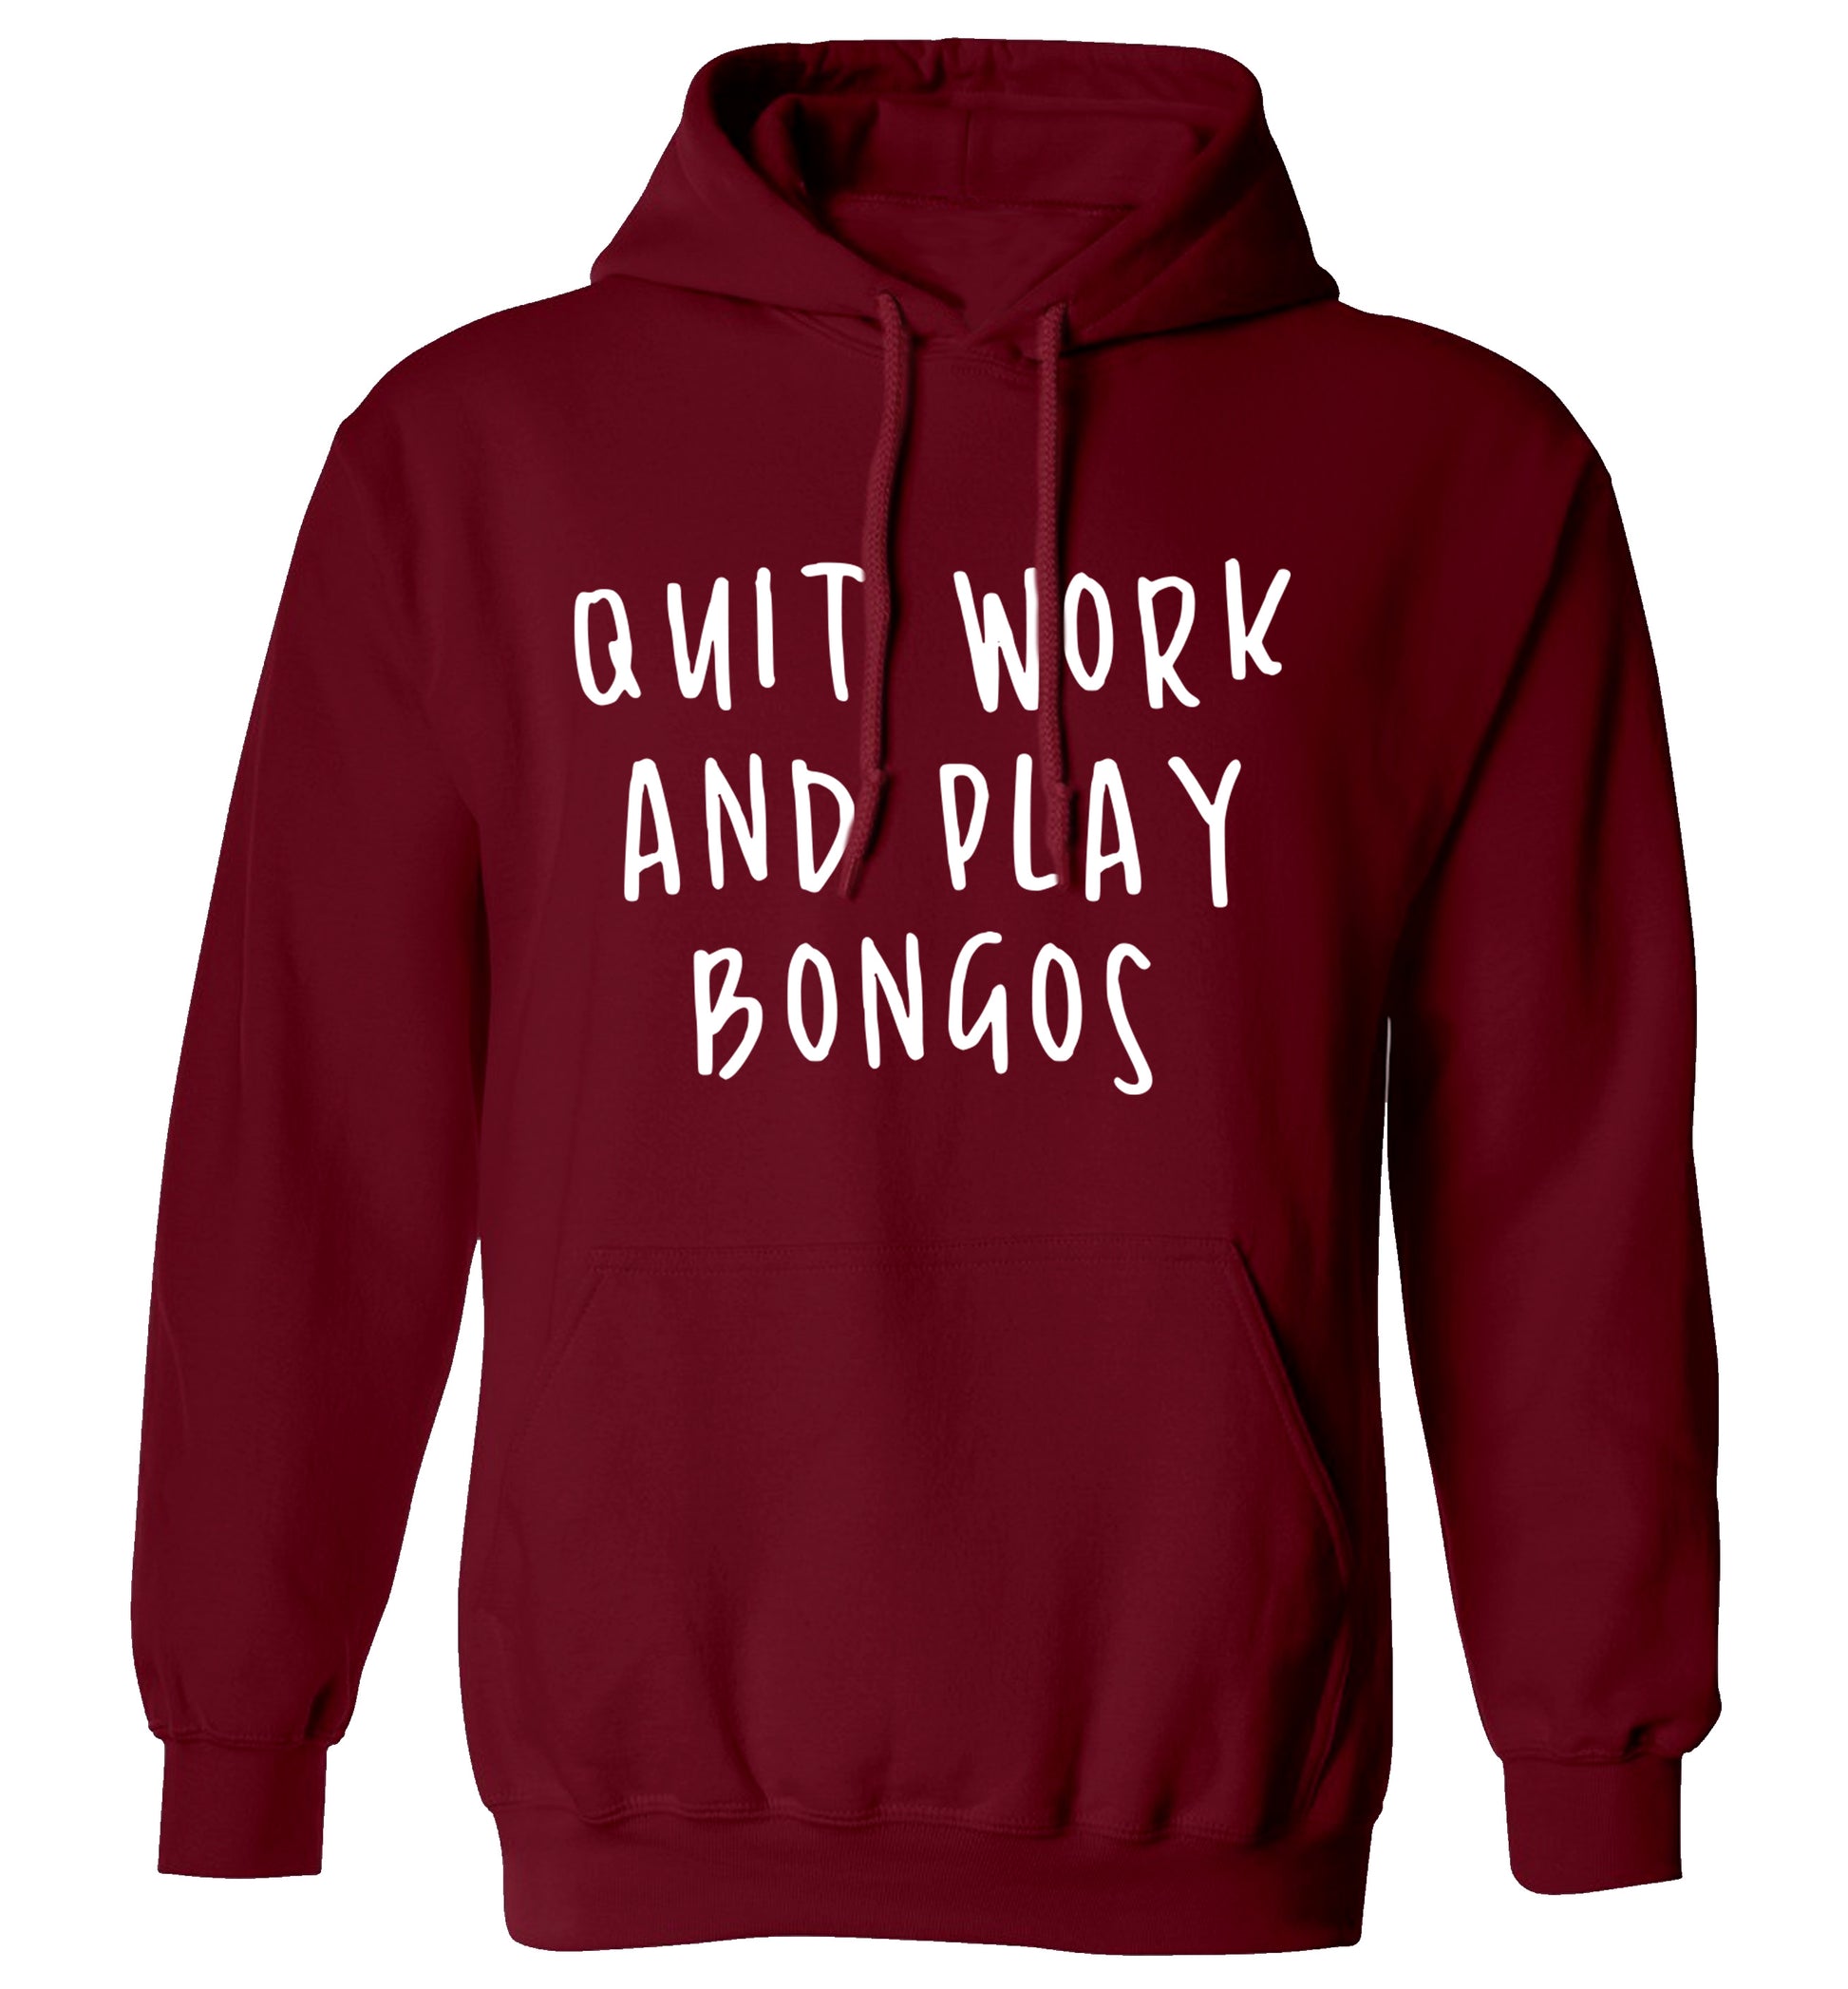 Quit work and play bongos adults unisex maroon hoodie 2XL